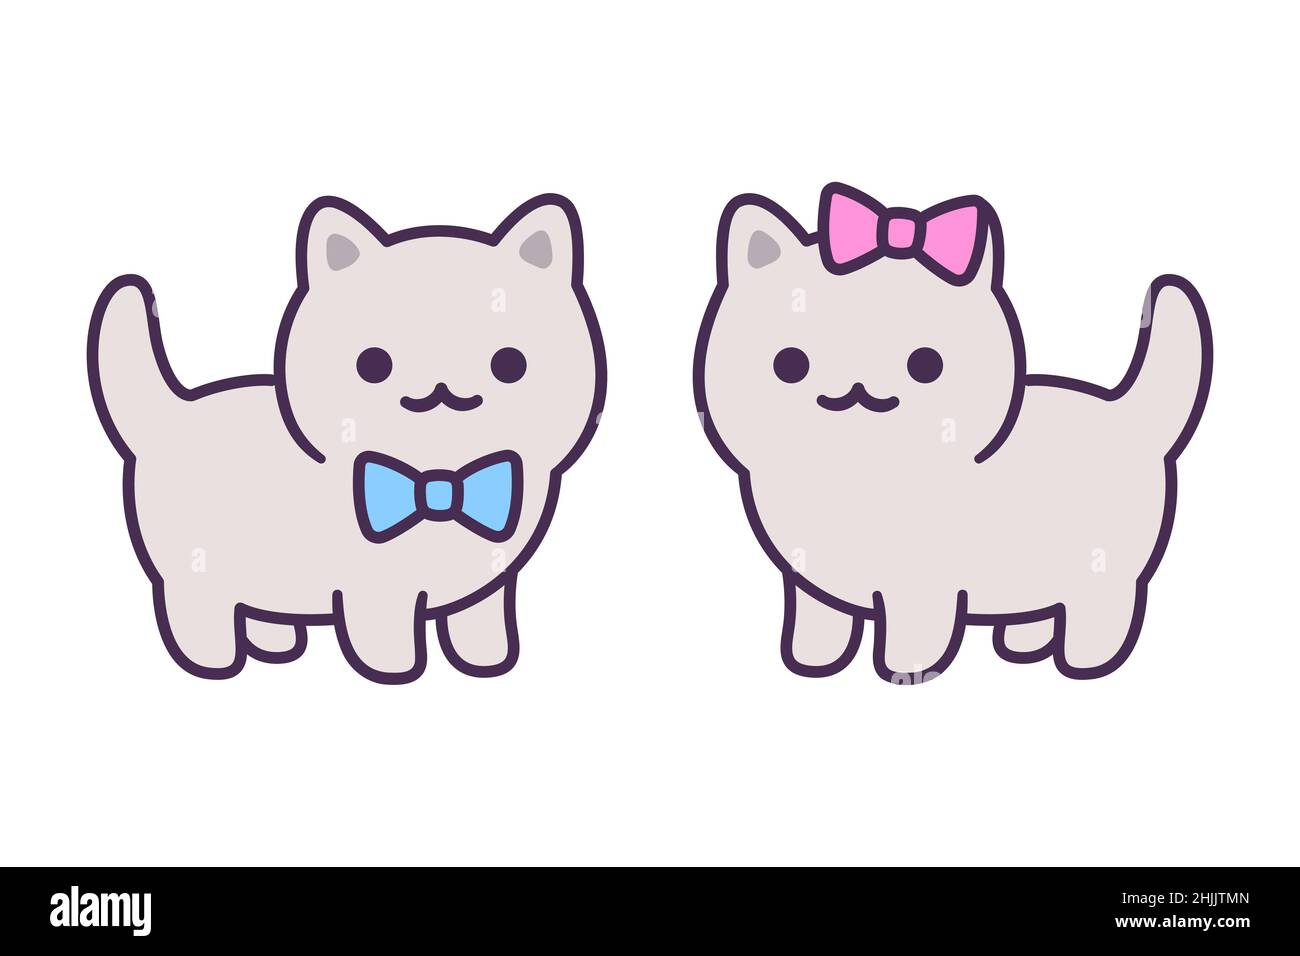 Cute cartoon baby kitten couple, boy and girl with blue and pink bow. Kawaii male and female cat icon. Vector illustration for wedding or baby gender Stock Vector